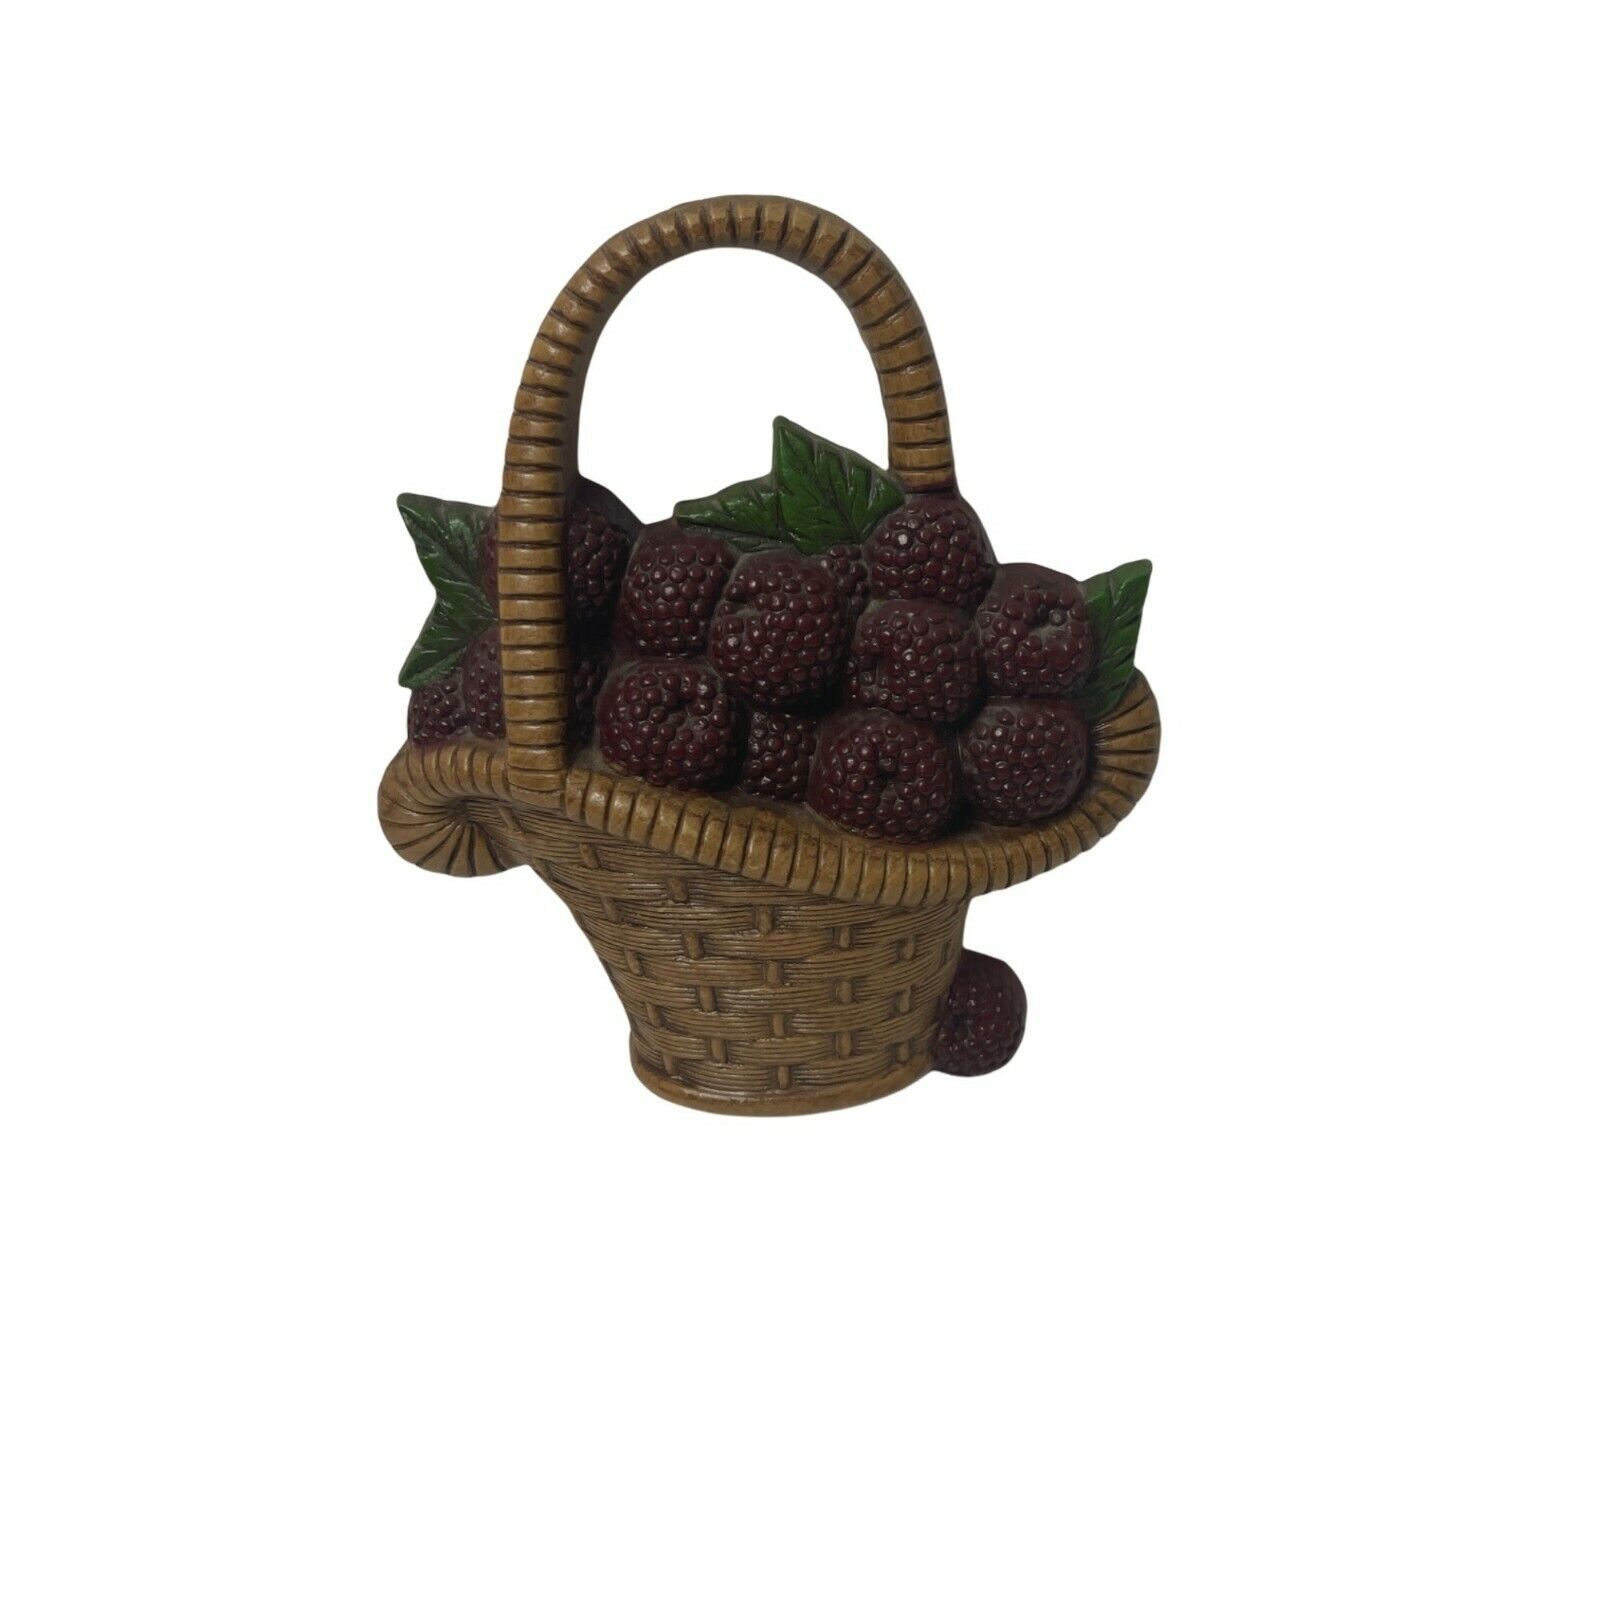 Vintage Burwood Products Co. 1985 Kitchen Decor - Basket of Berries Wall Decor - $7.61